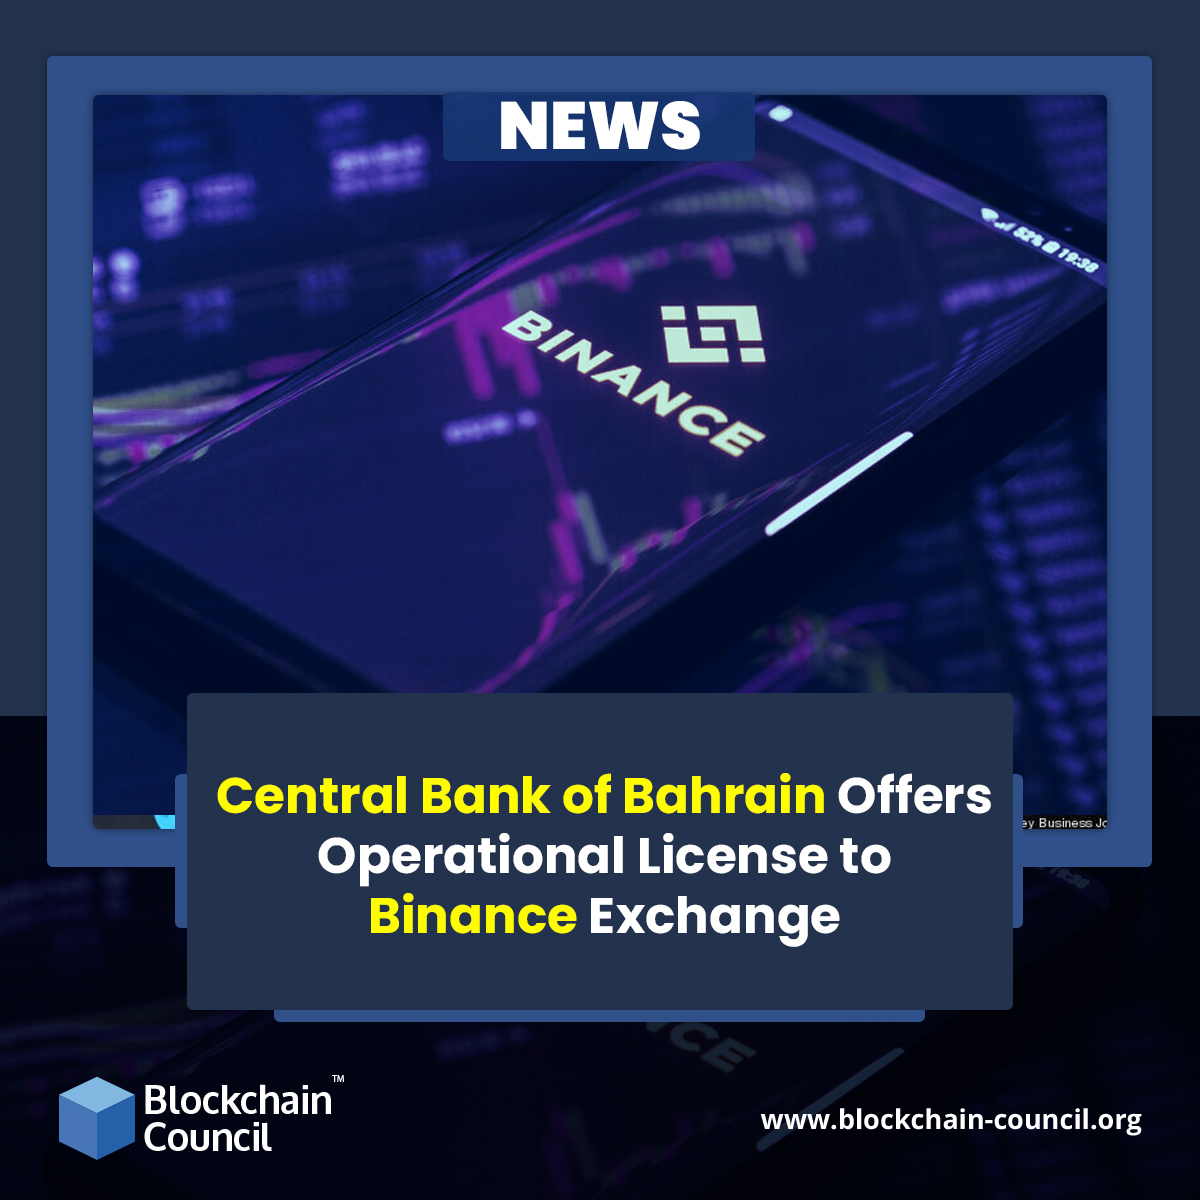 Central Bank of Bahrain Offers Operational License to Binance Exchange